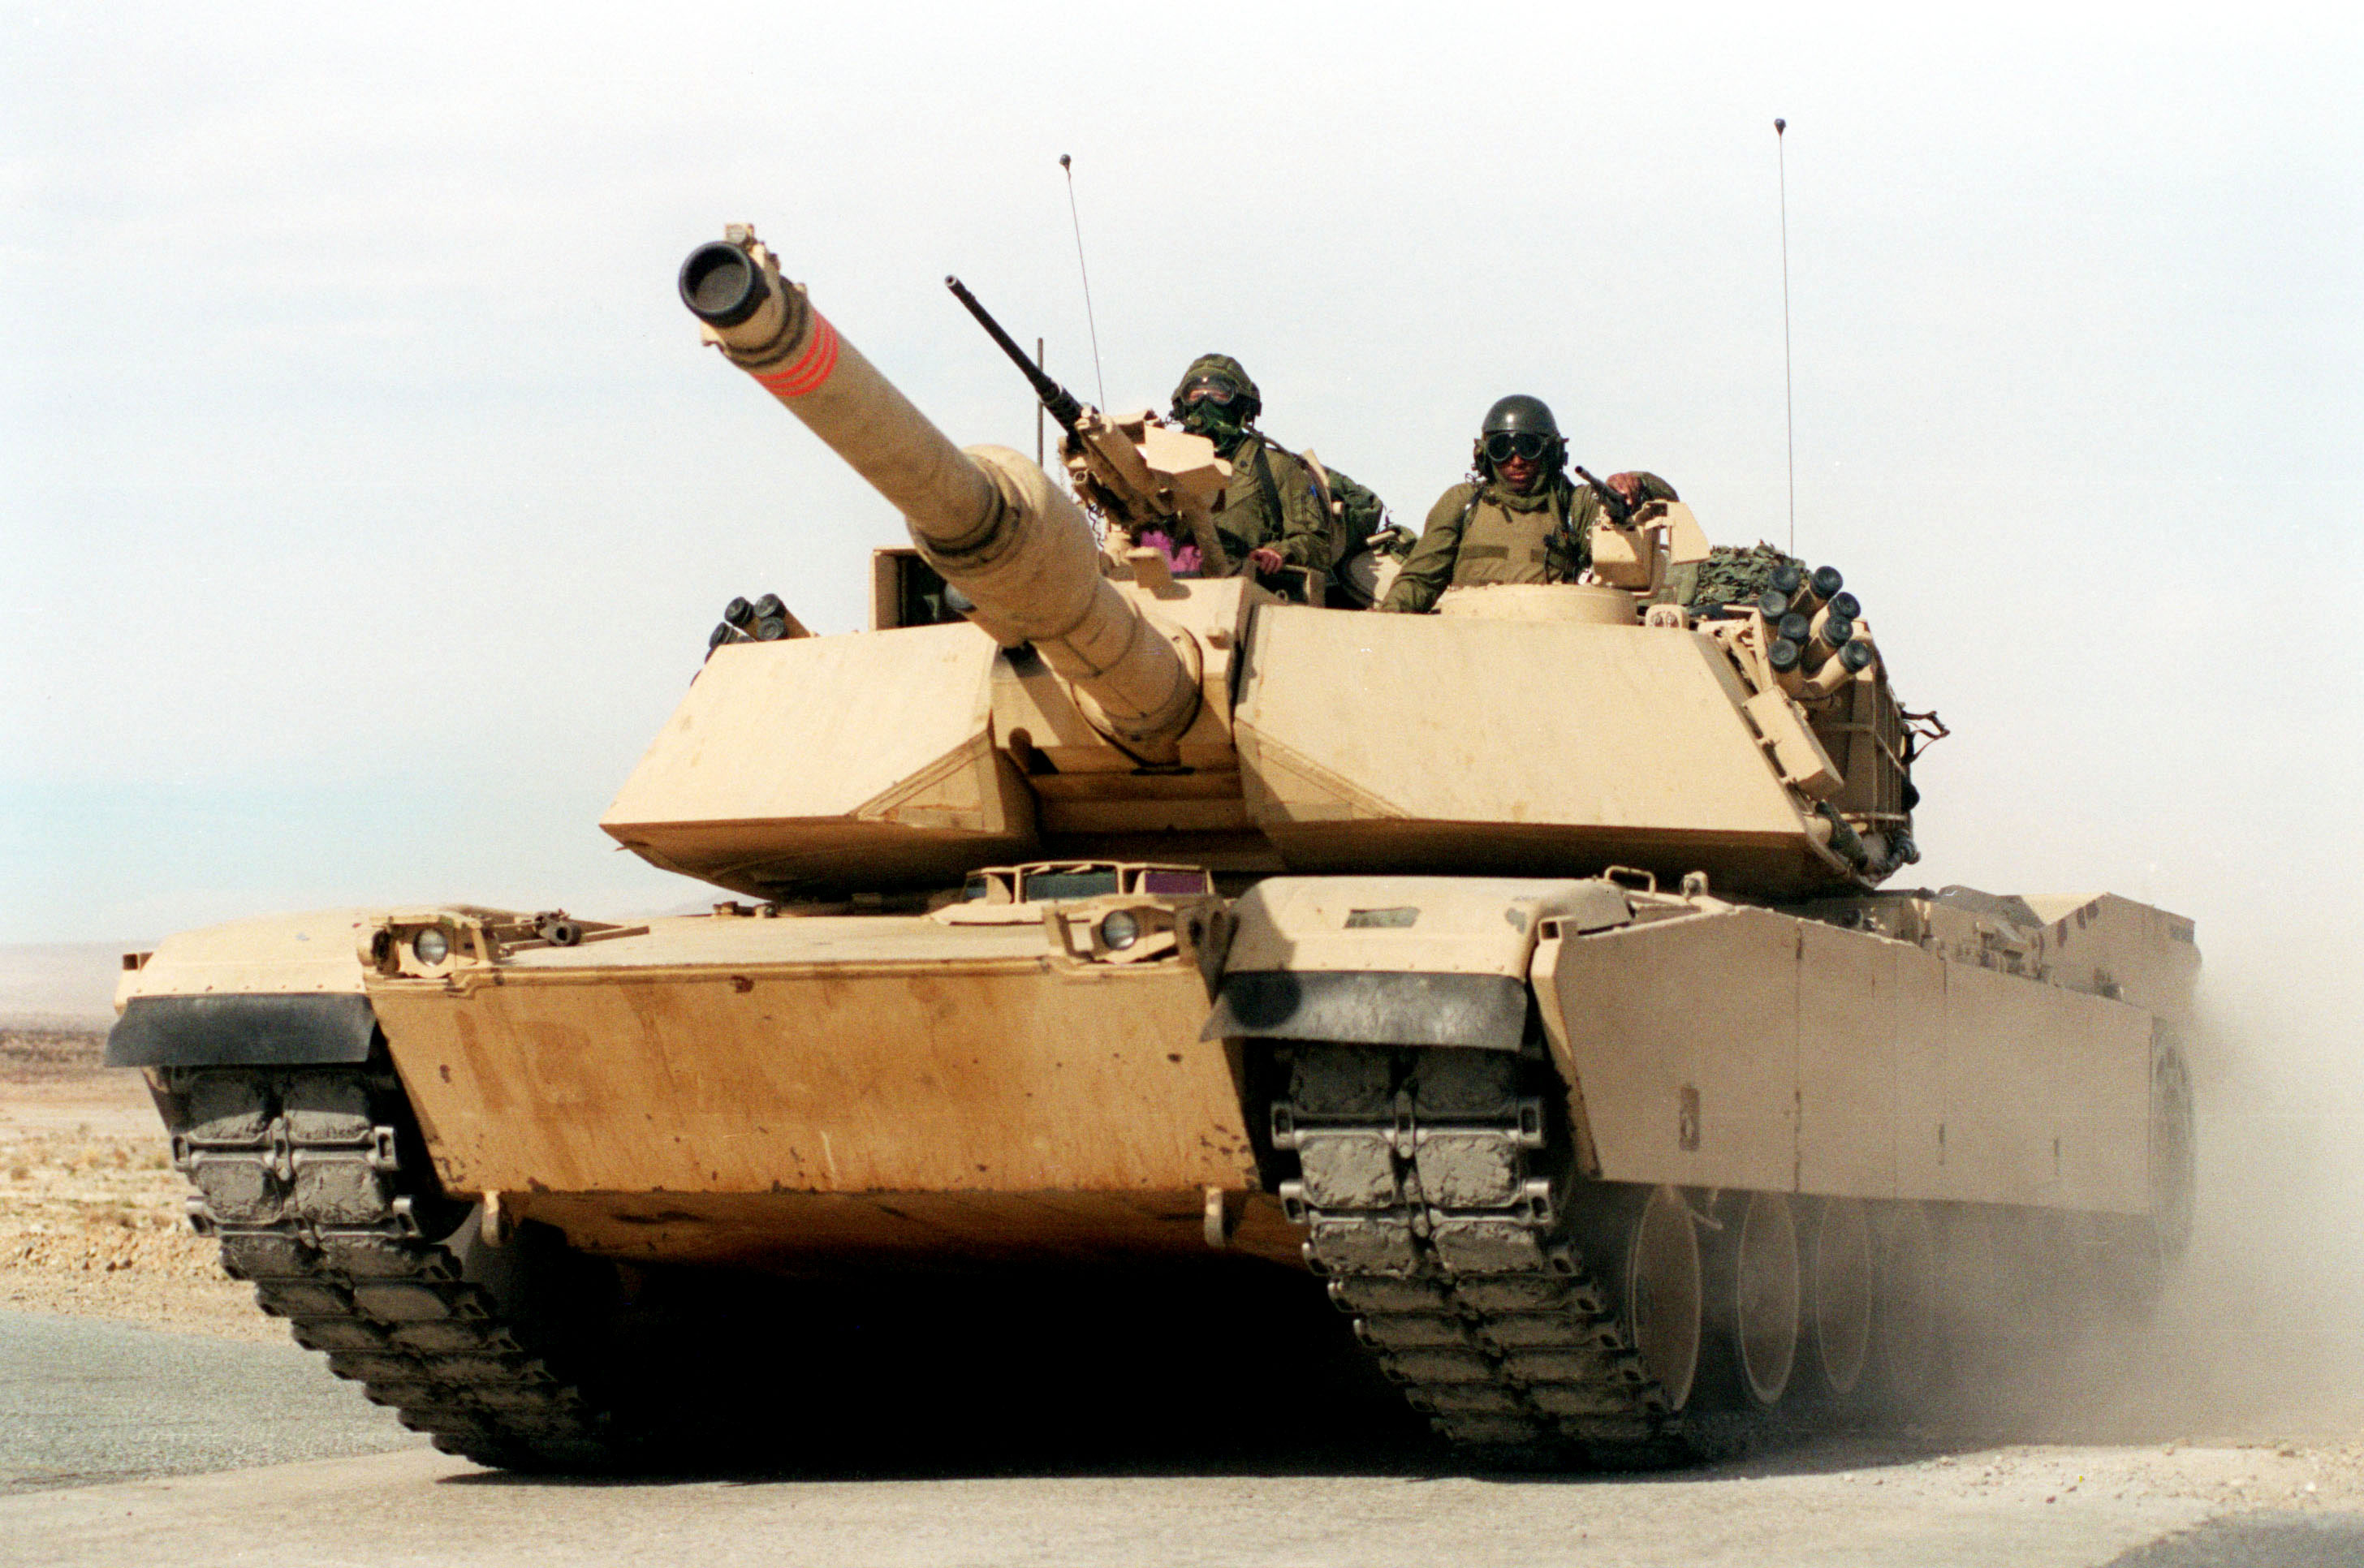 A U.S. Marine Corps M-1A1 Abrams main battle tank races across the desert at the Marine Corps Air Ground Combat Center, Twentynine Palms, Calif., on Jan. 27, 1998. These tankers from the 2nd Tank Battalion are taking part in Combined Arms Exercise 3-98. DoD photo by Lance Cpl. W. Makela, U.S. Marine Corps.